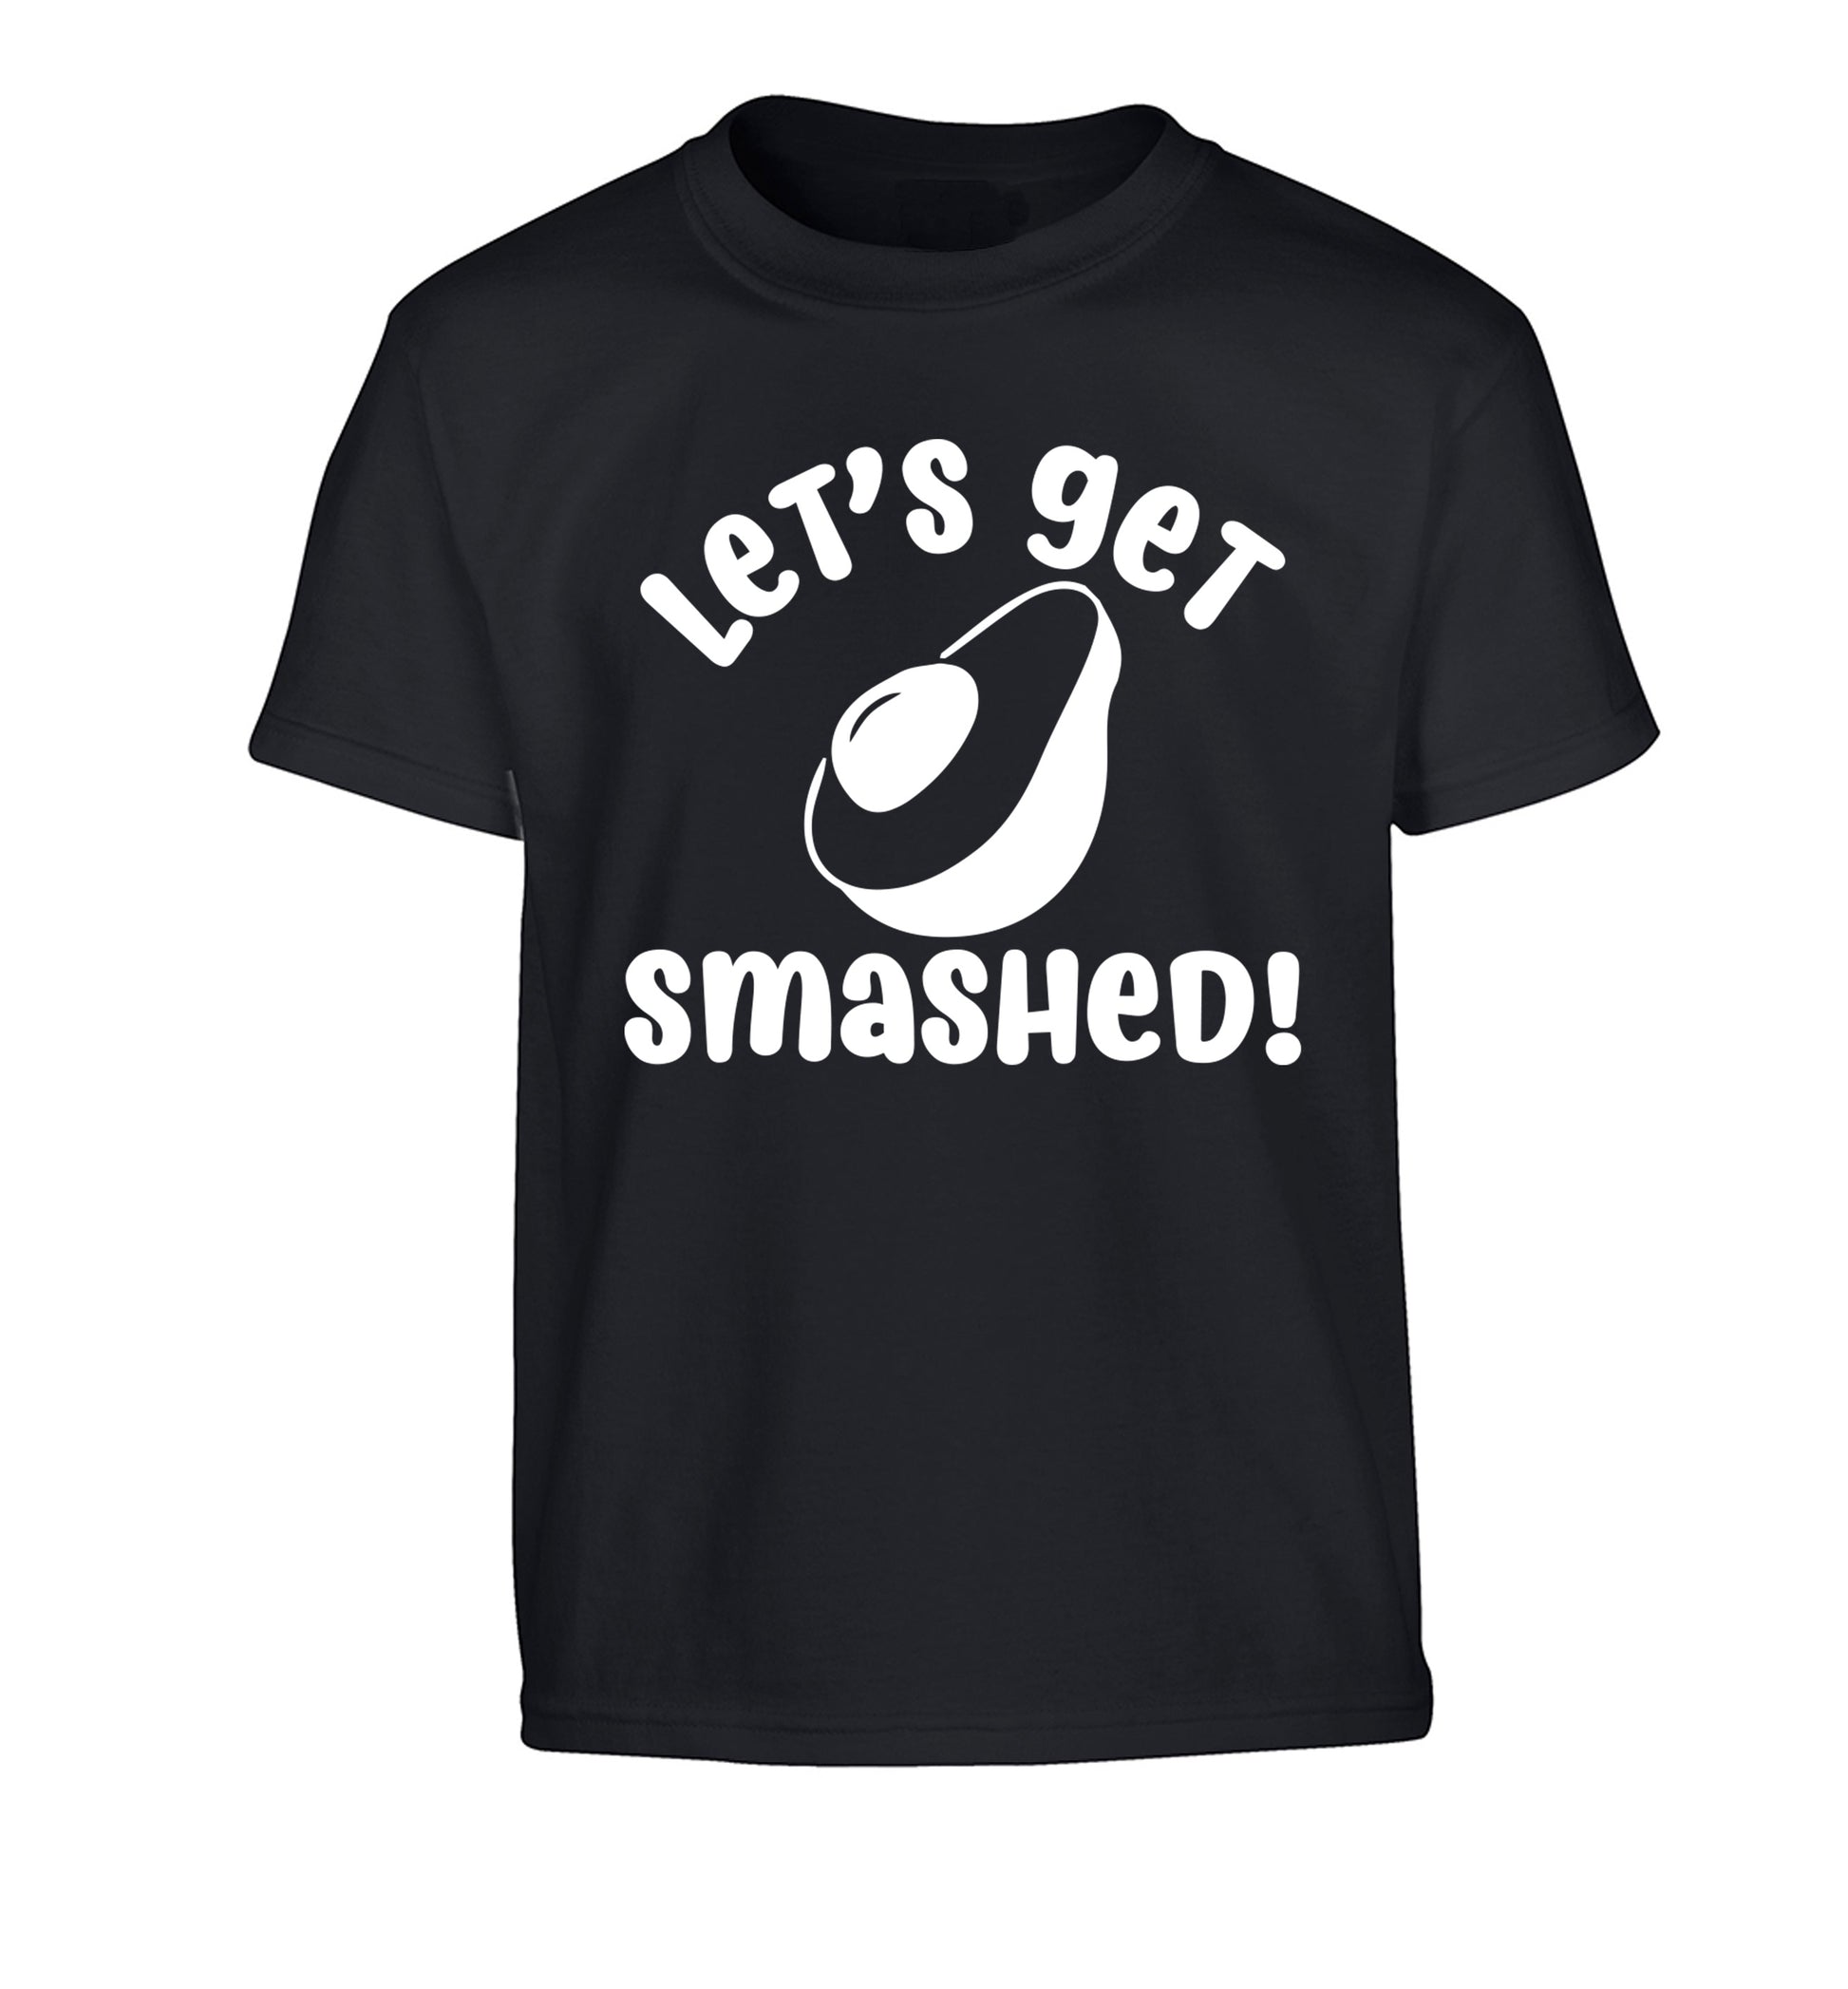 Let's get smashed Children's black Tshirt 12-14 Years